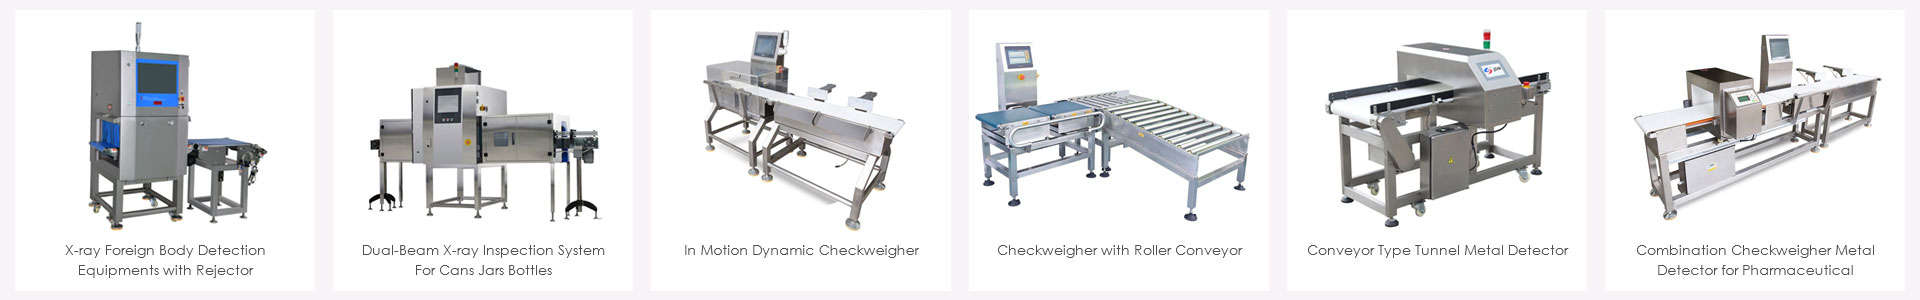 Combination Checkweigher Metal Detector for Pharmaceutical